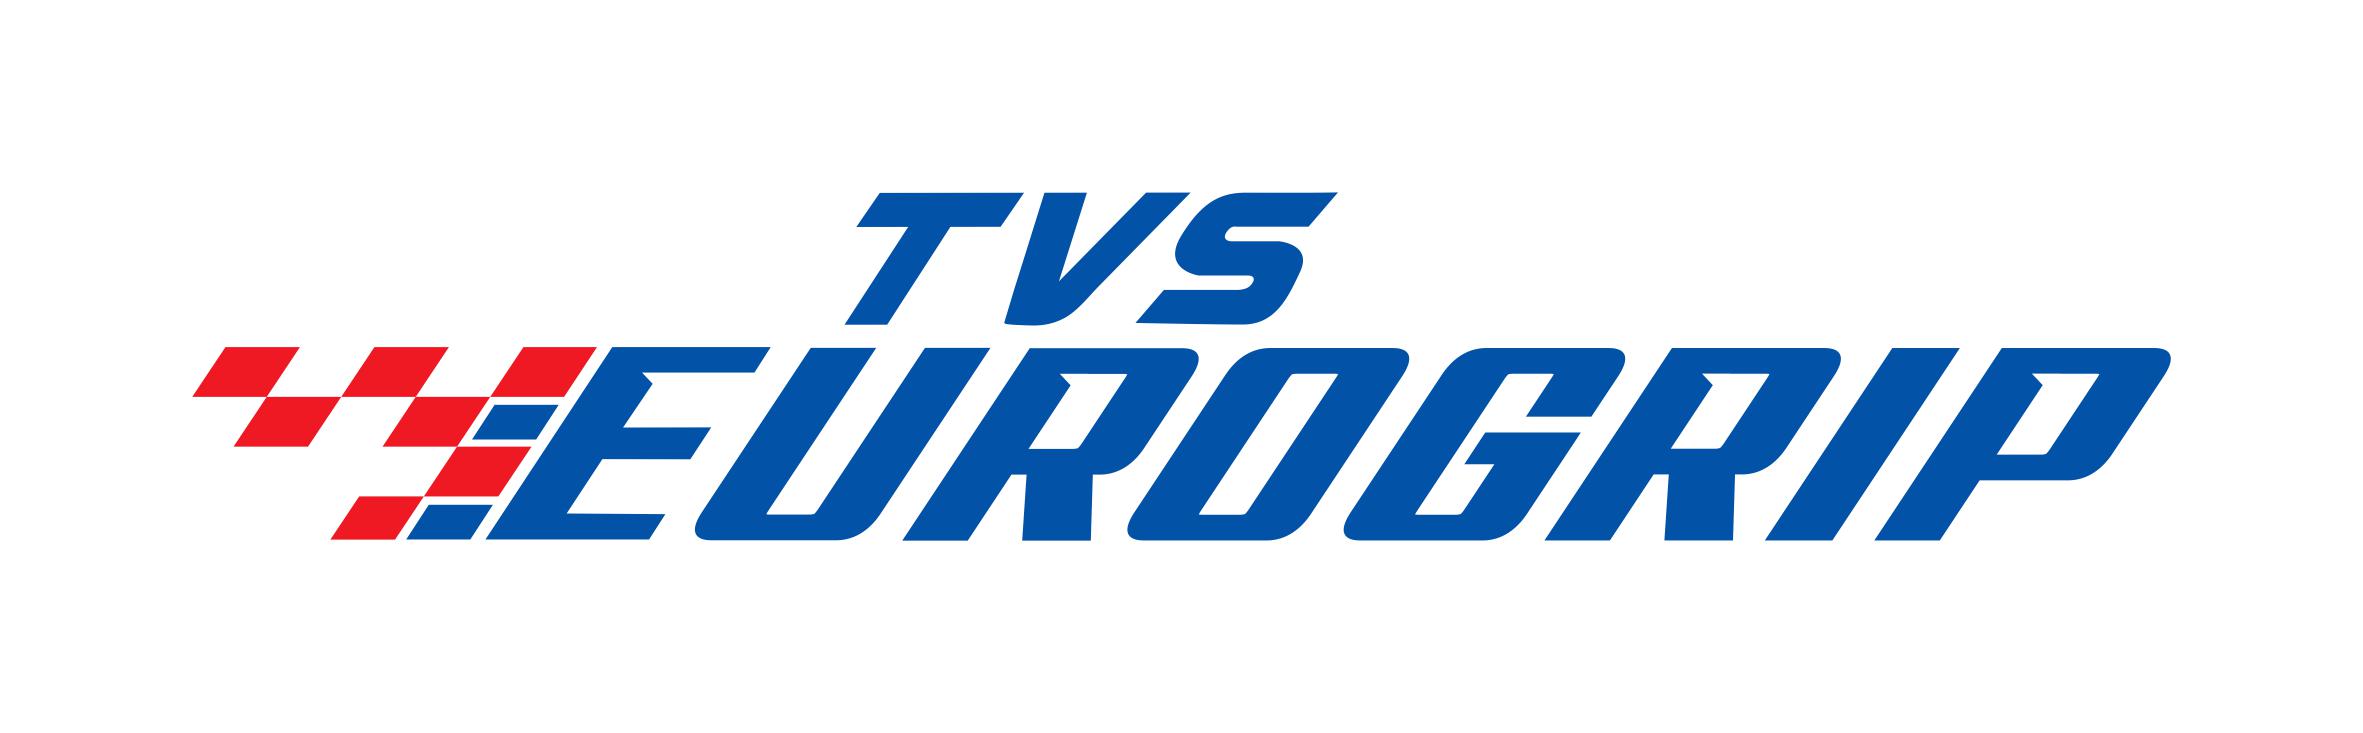 tvs-eurogrips-new-brand-campaign-talks-about-tyres-for-a-country-full-of-turns